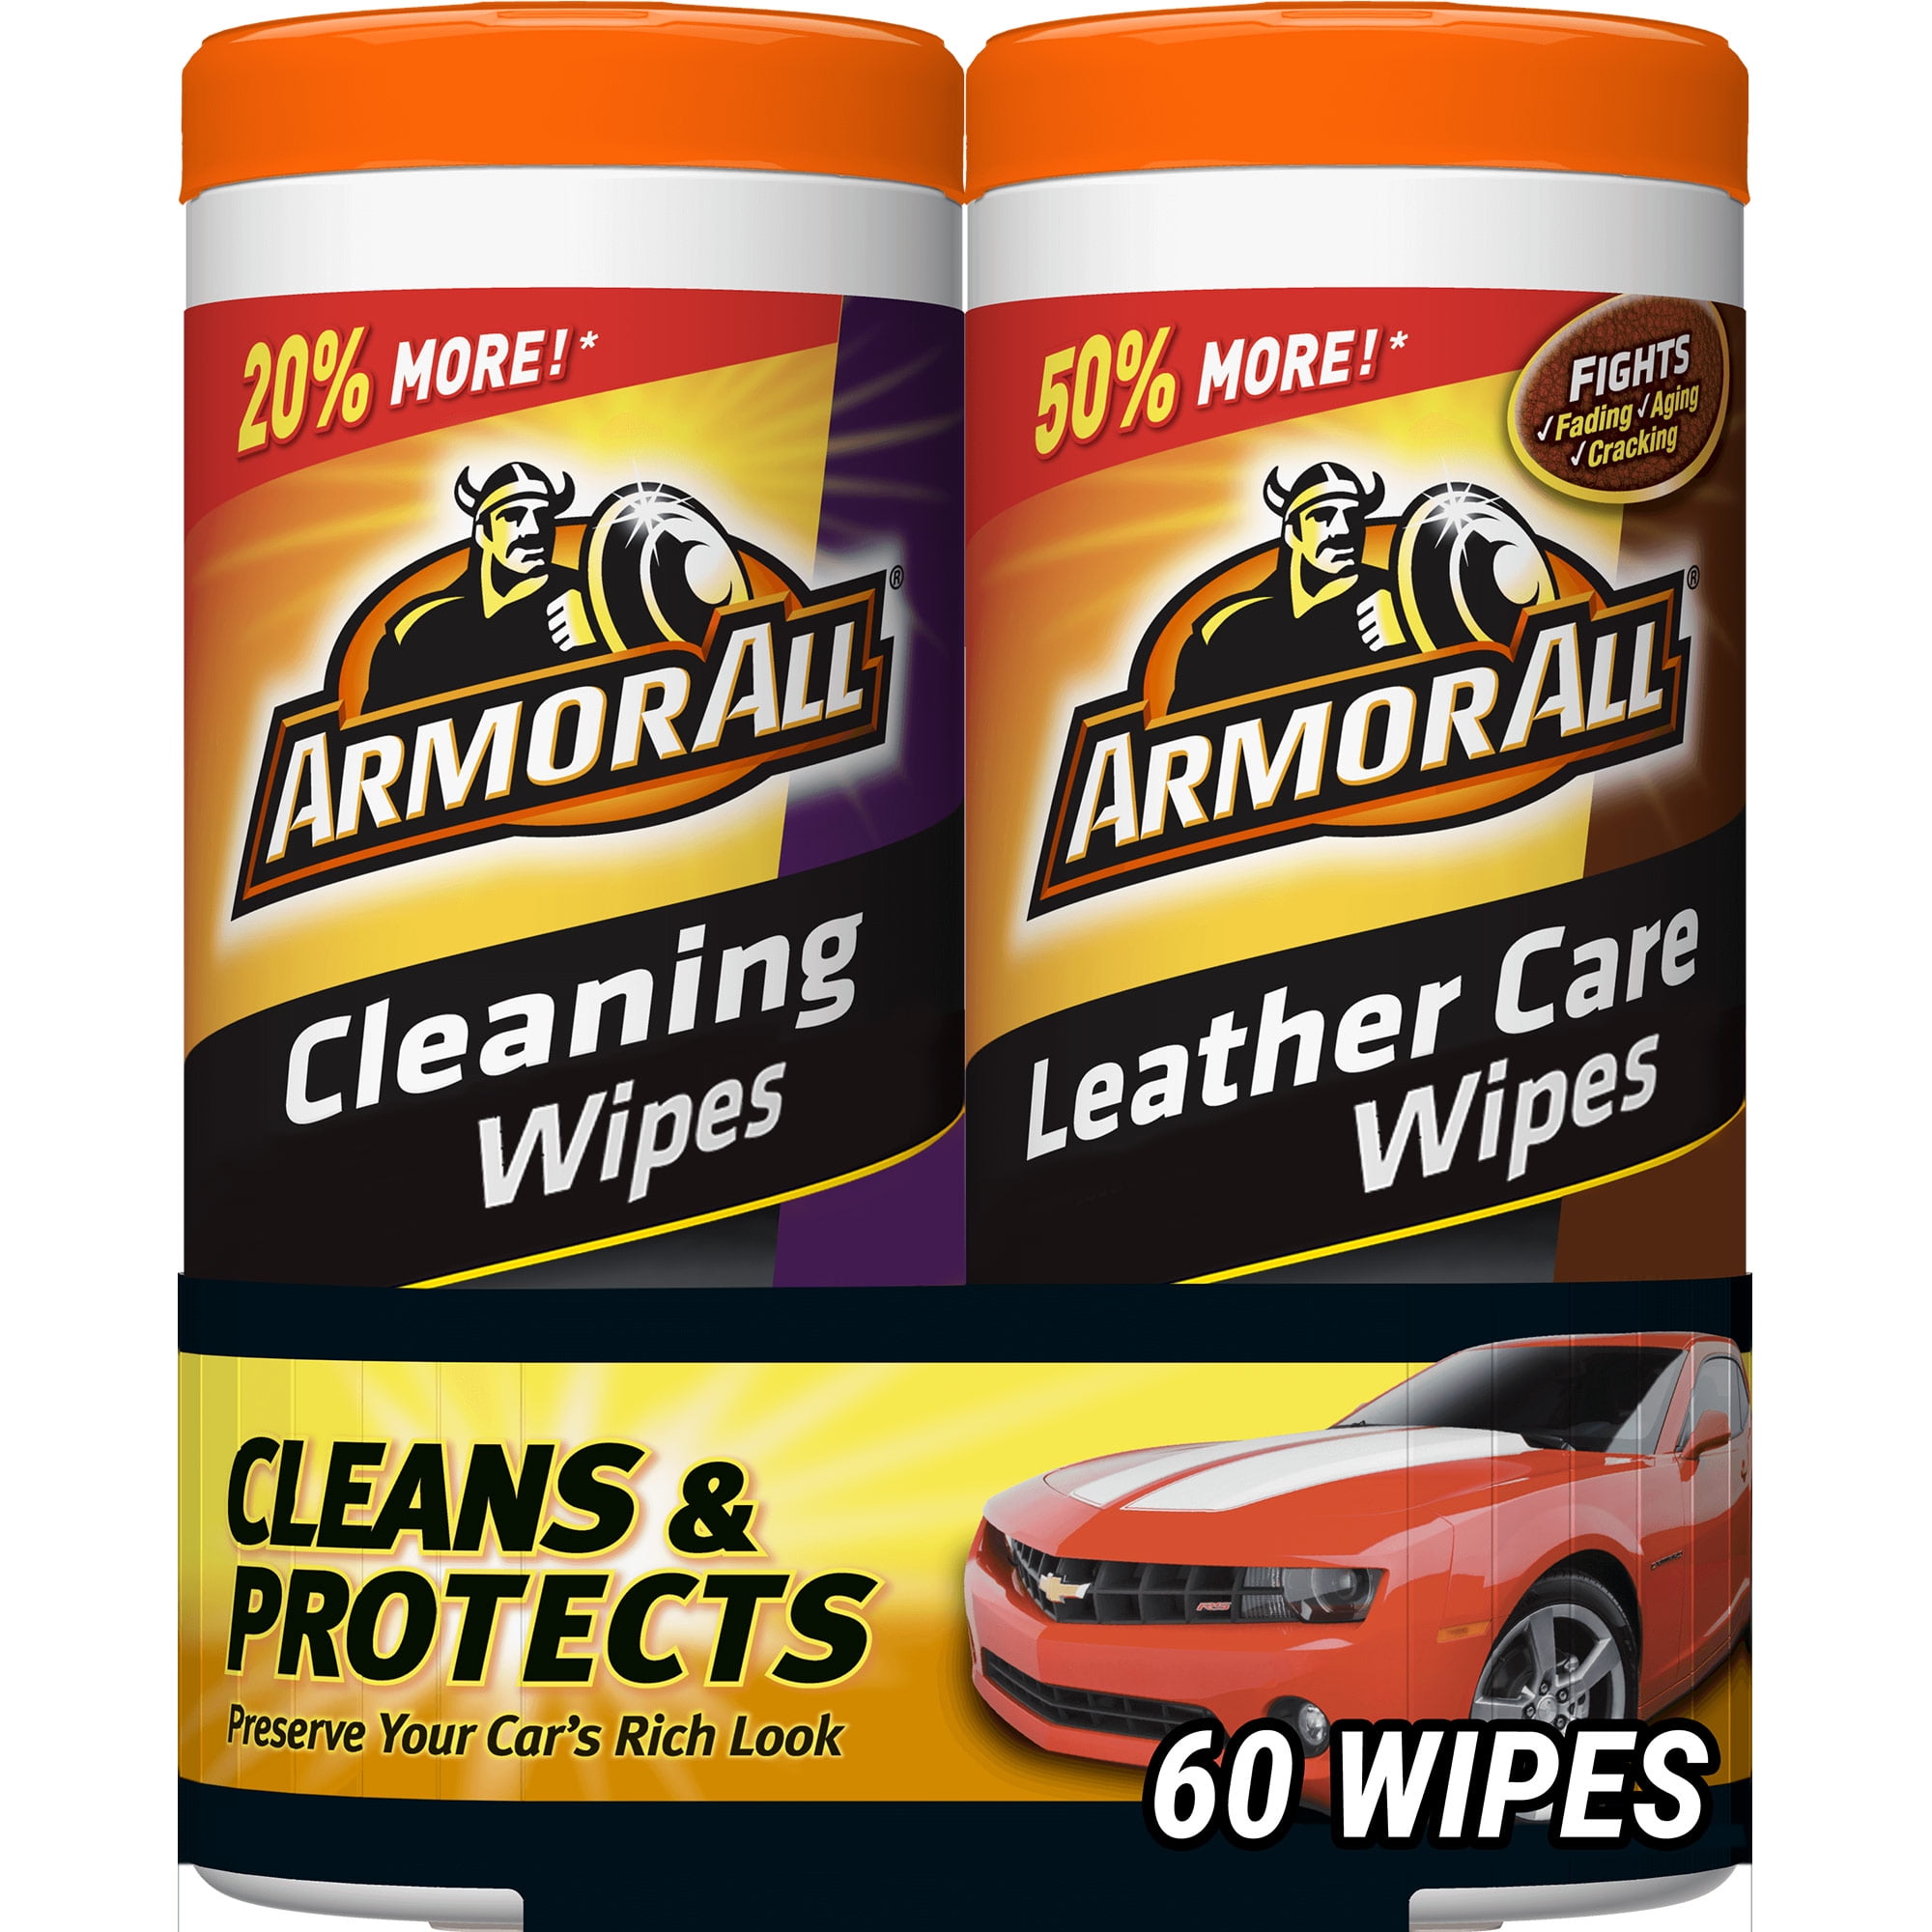 Armor All Cleaning Wipes total 100 count 50 count 2-pack 